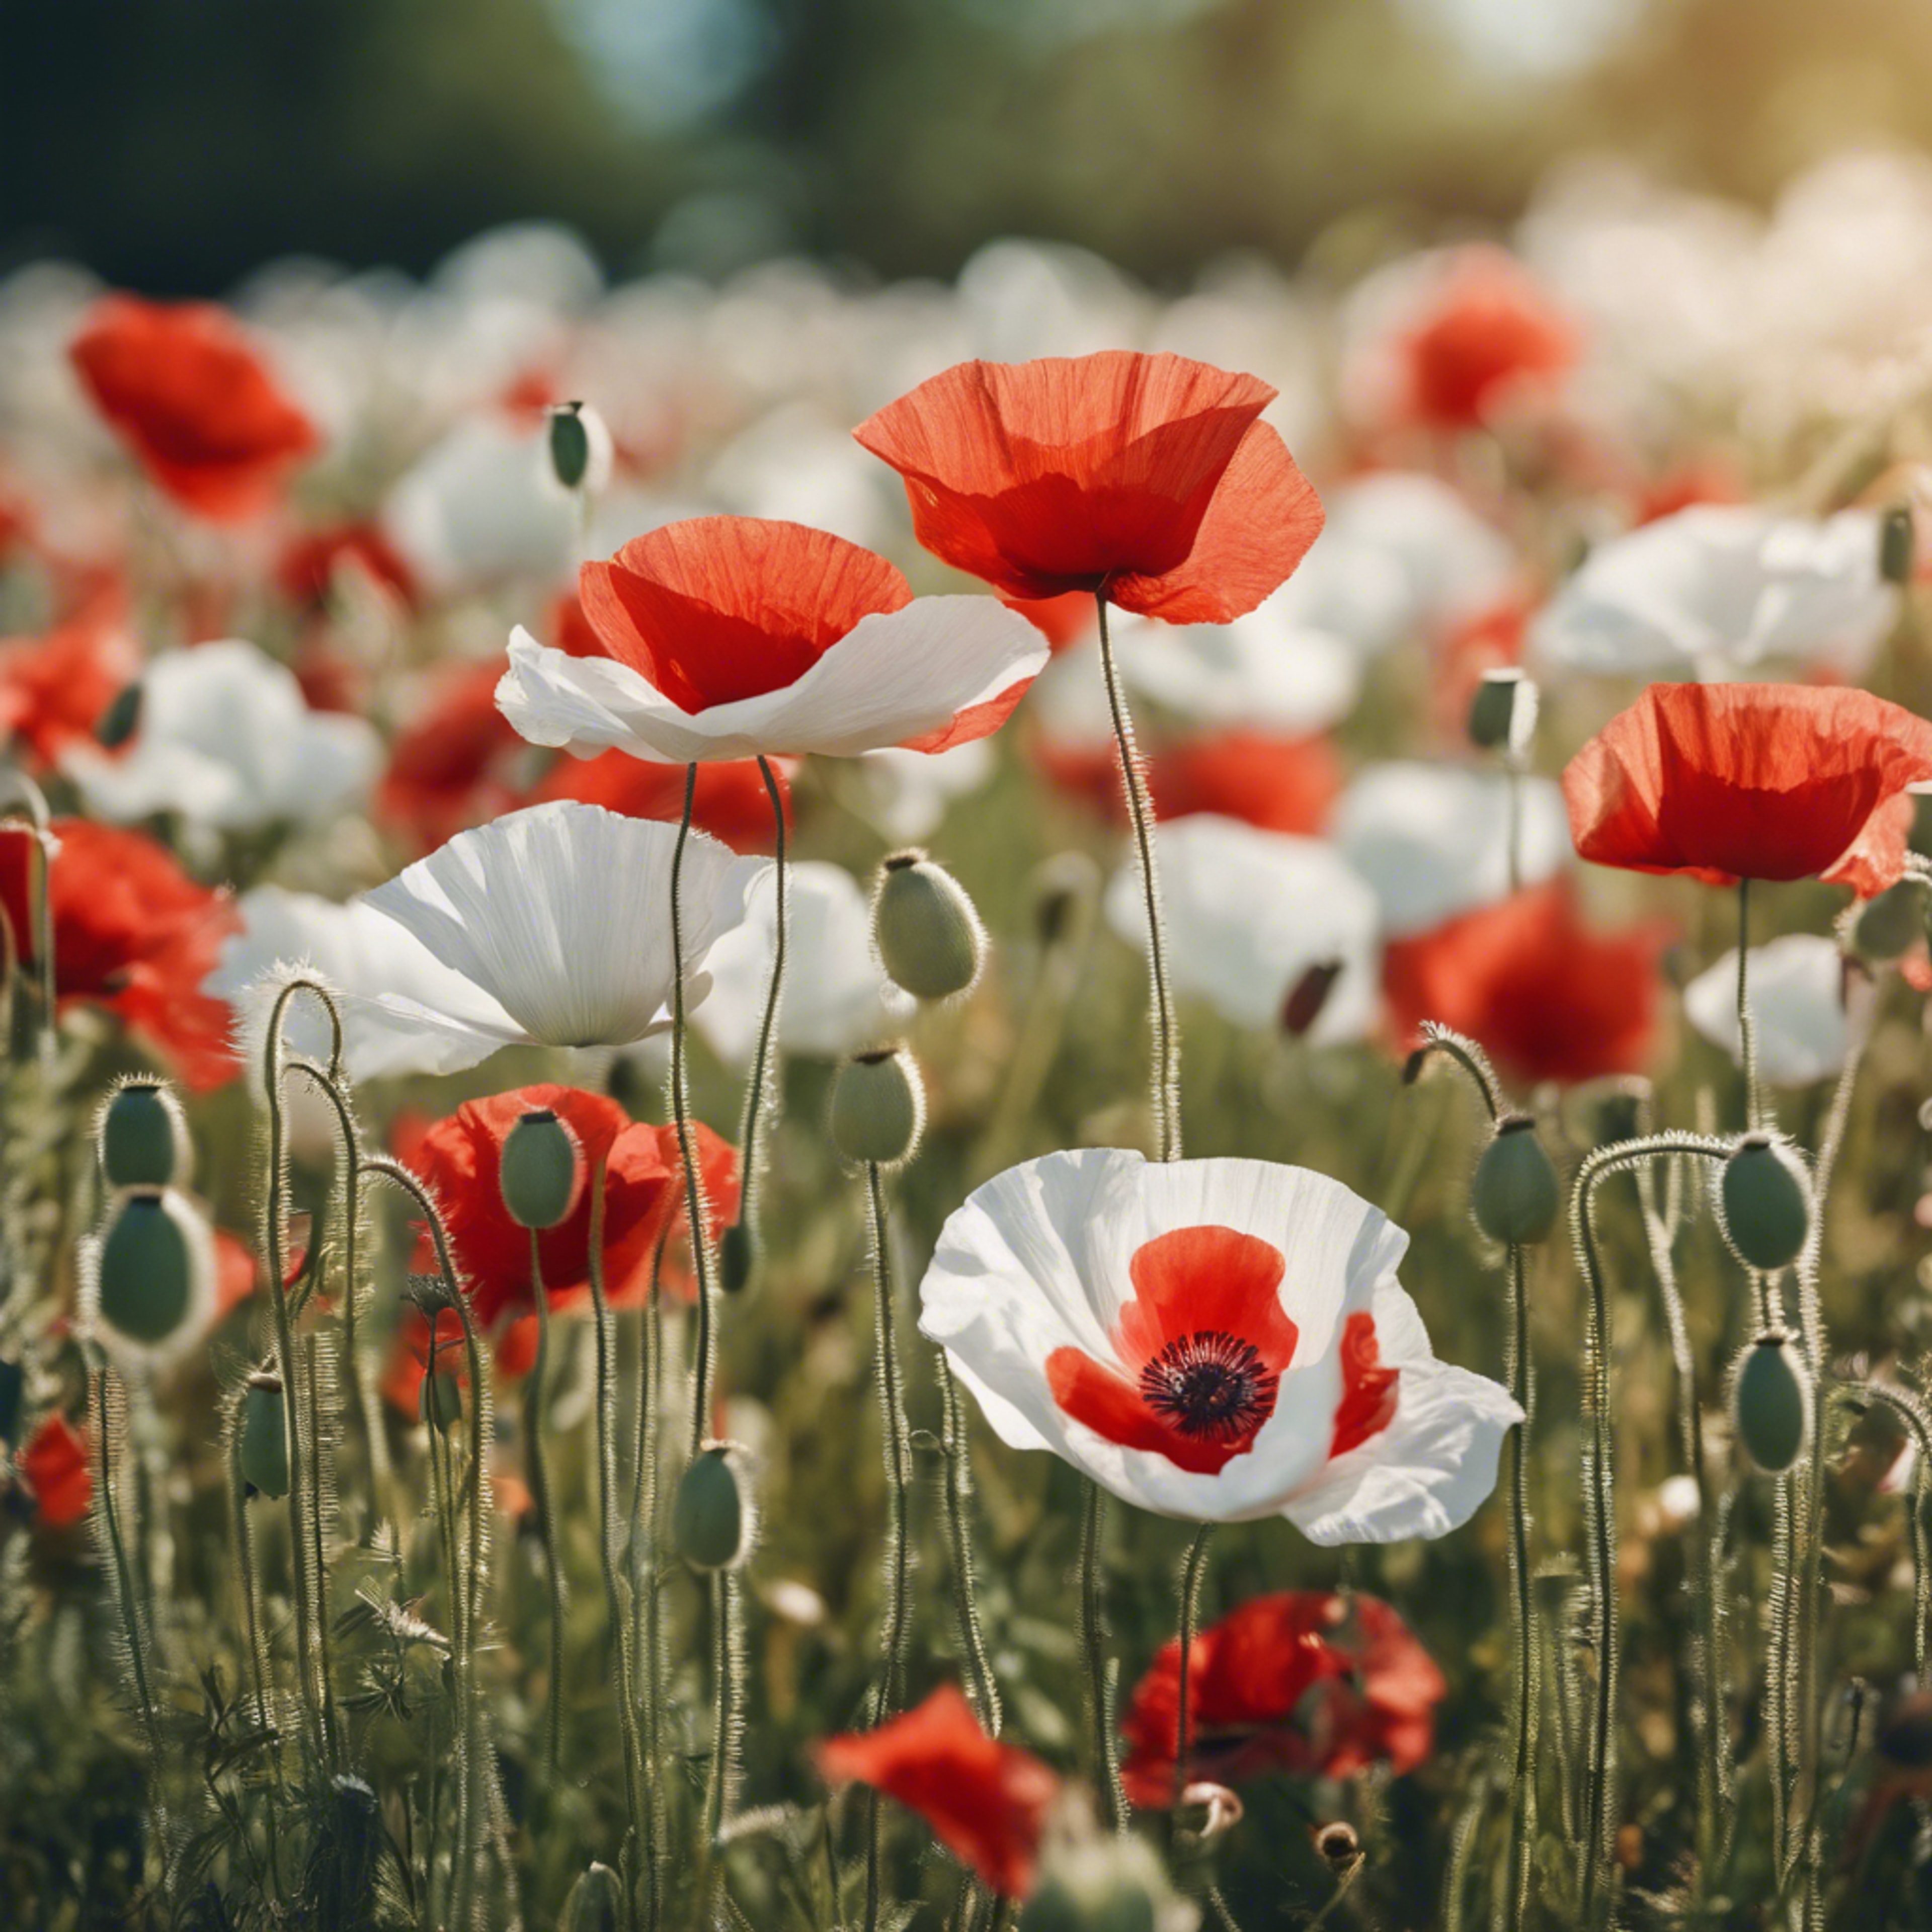 A patch of vibrant red and white poppy flowers in a summer meadow. Тапет[6e8905720b3f496680eb]